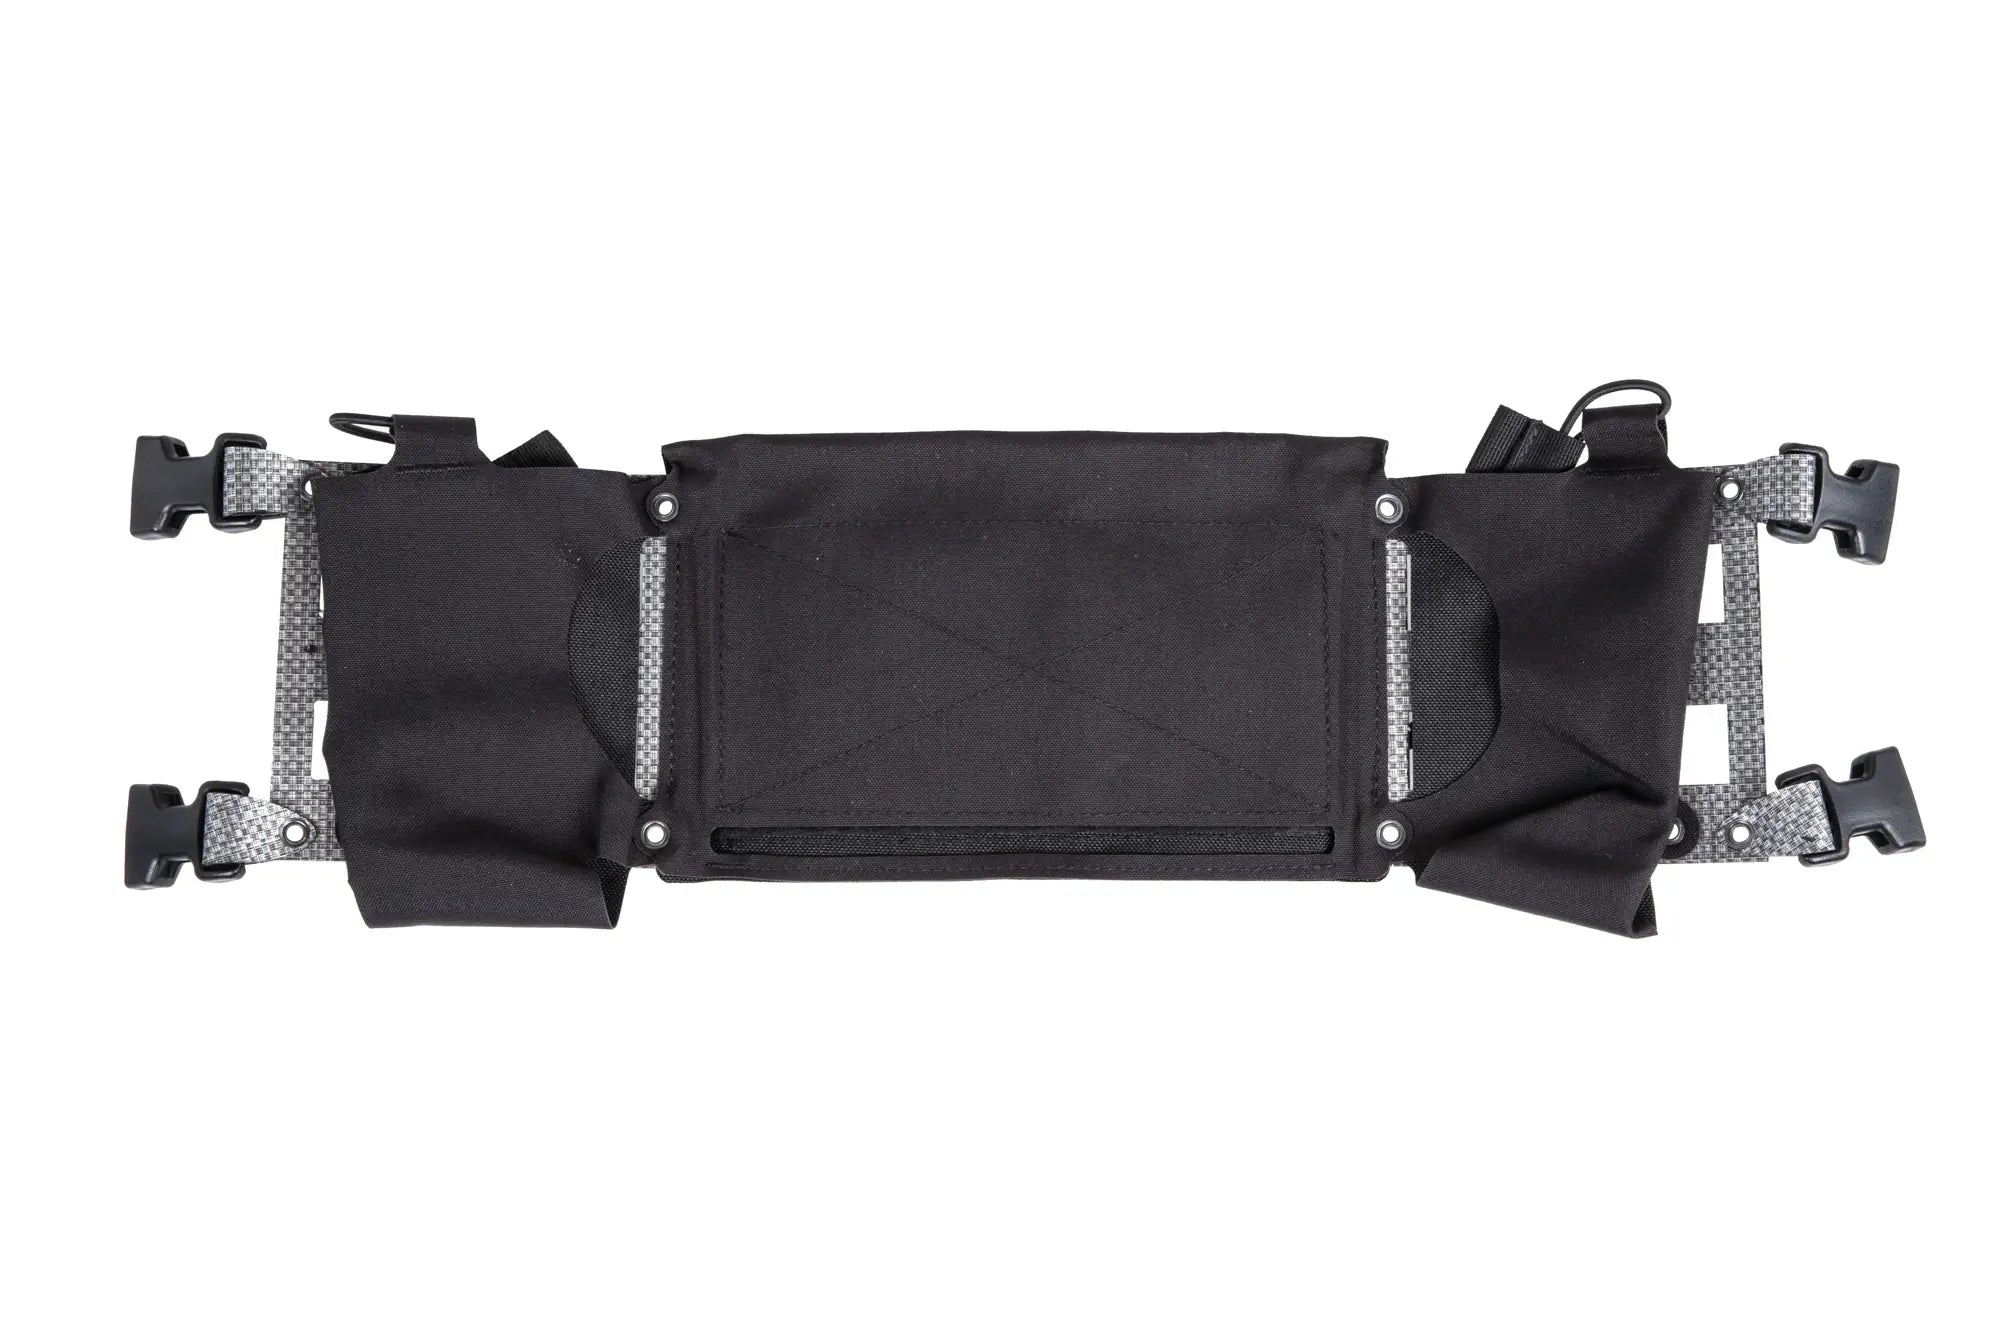 Module for Chest Rig MK4 Chassis II Wosport Black